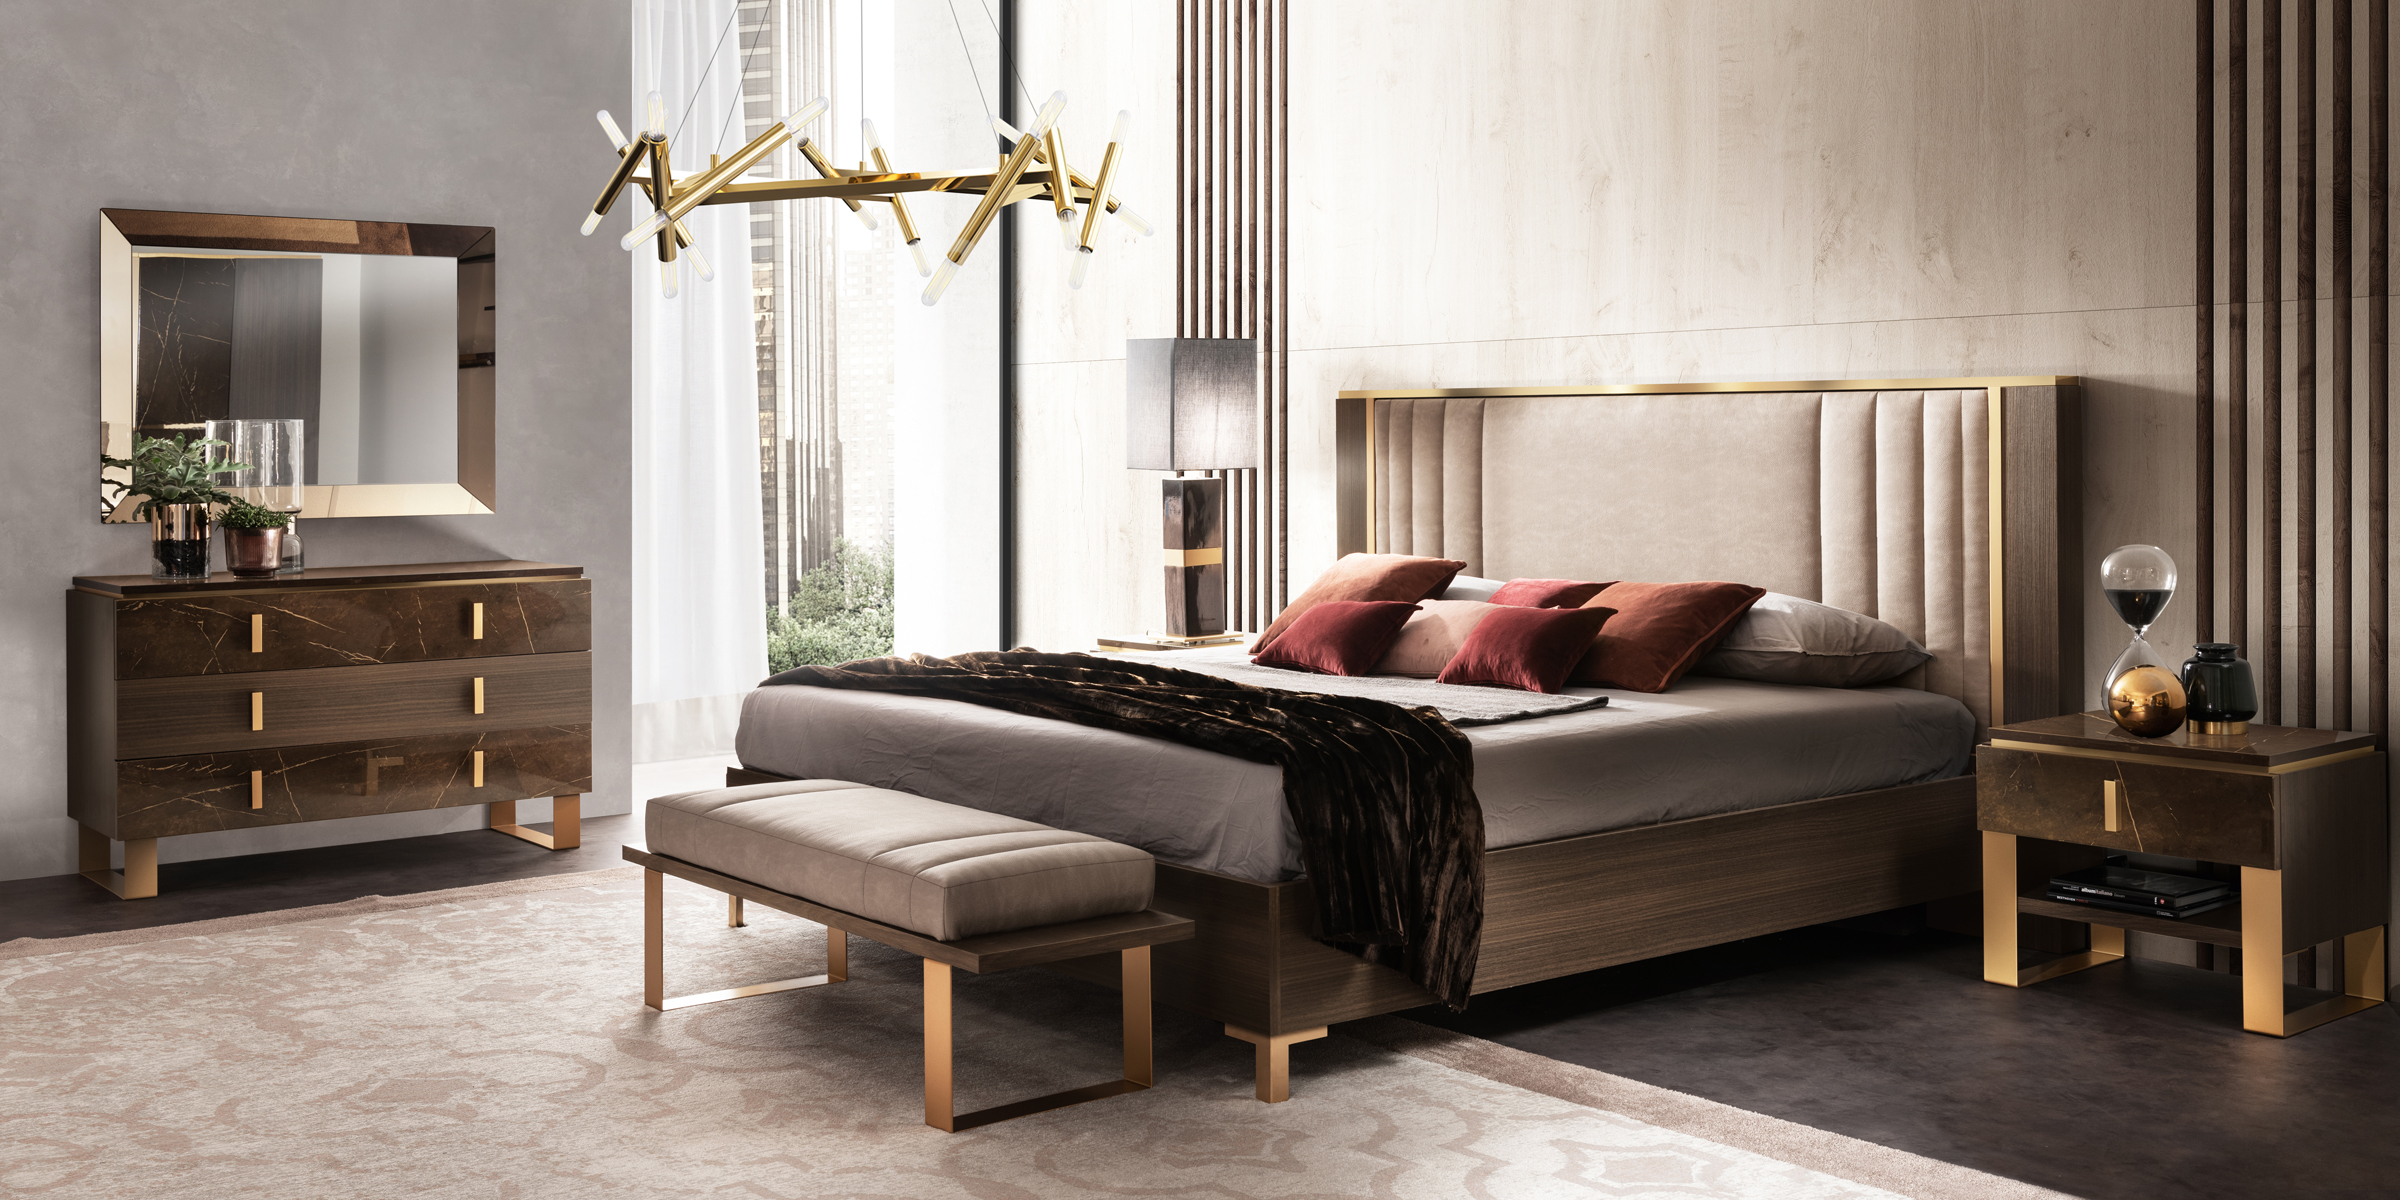 Bedroom Furniture Classic Bedrooms QS and KS Essenza Bedroom by Arredoclassic, Italy Additional